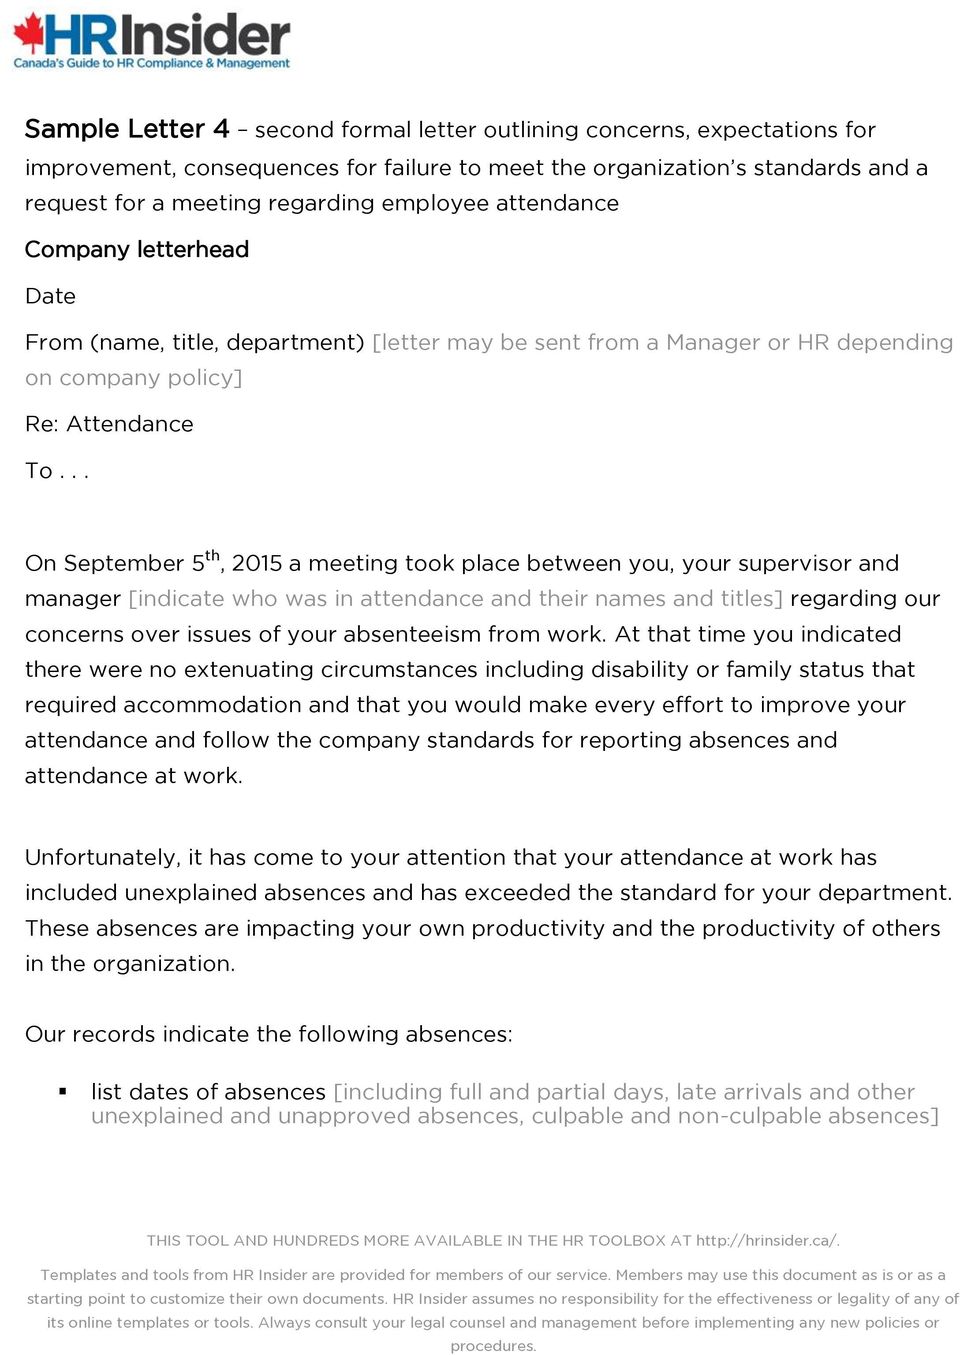 .. On September 5 th, 2015 a meeting took place between you, your supervisor and manager [indicate who was in attendance and their names and titles] regarding our concerns over issues of your